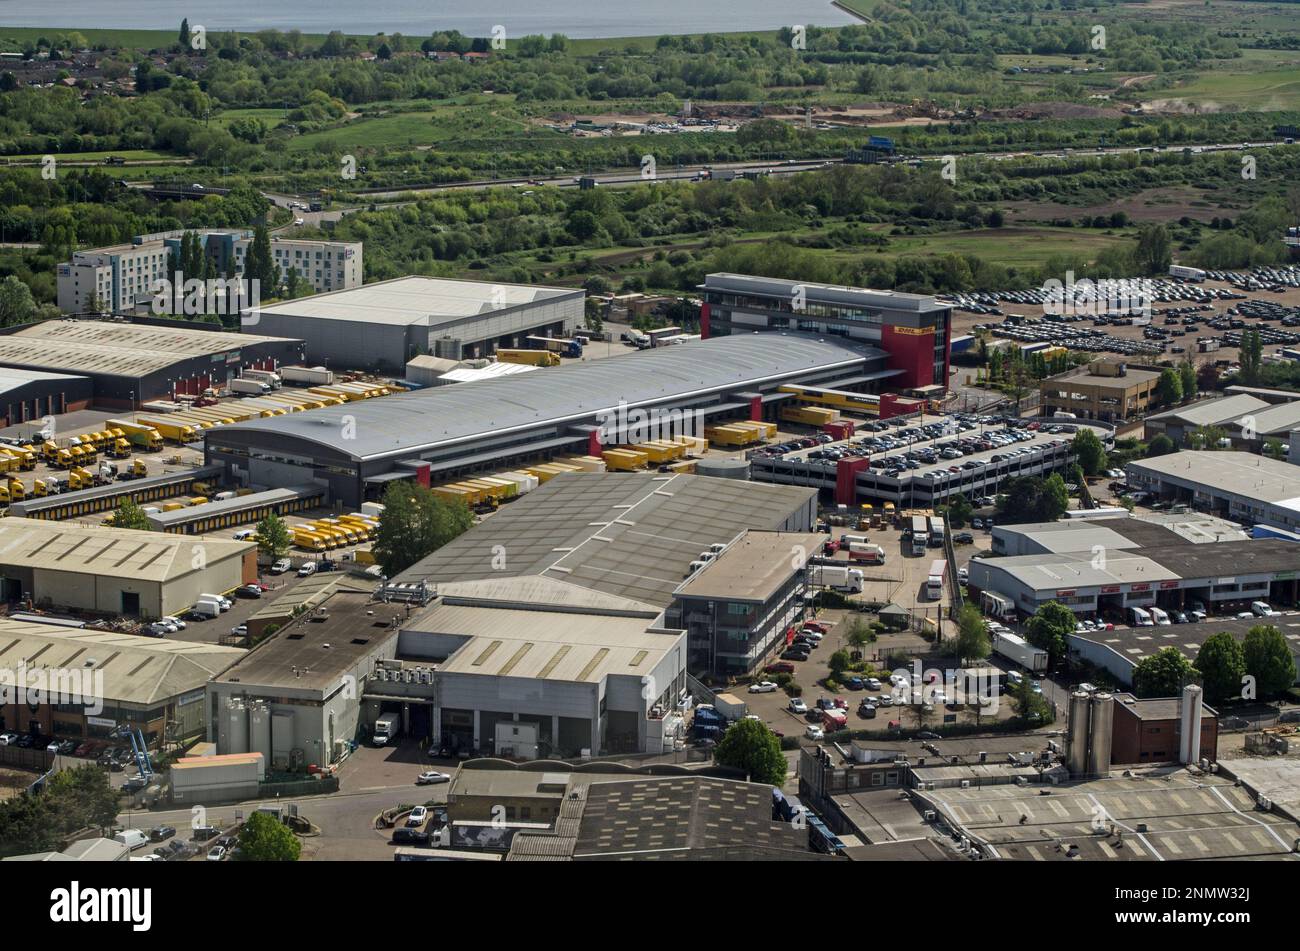 Slough, UK - April 26, 2022:  Aerial view of an industrial estate in Colnbrook, Slough which includes the Southern Hub of DHL Express. The warehouses Stock Photo